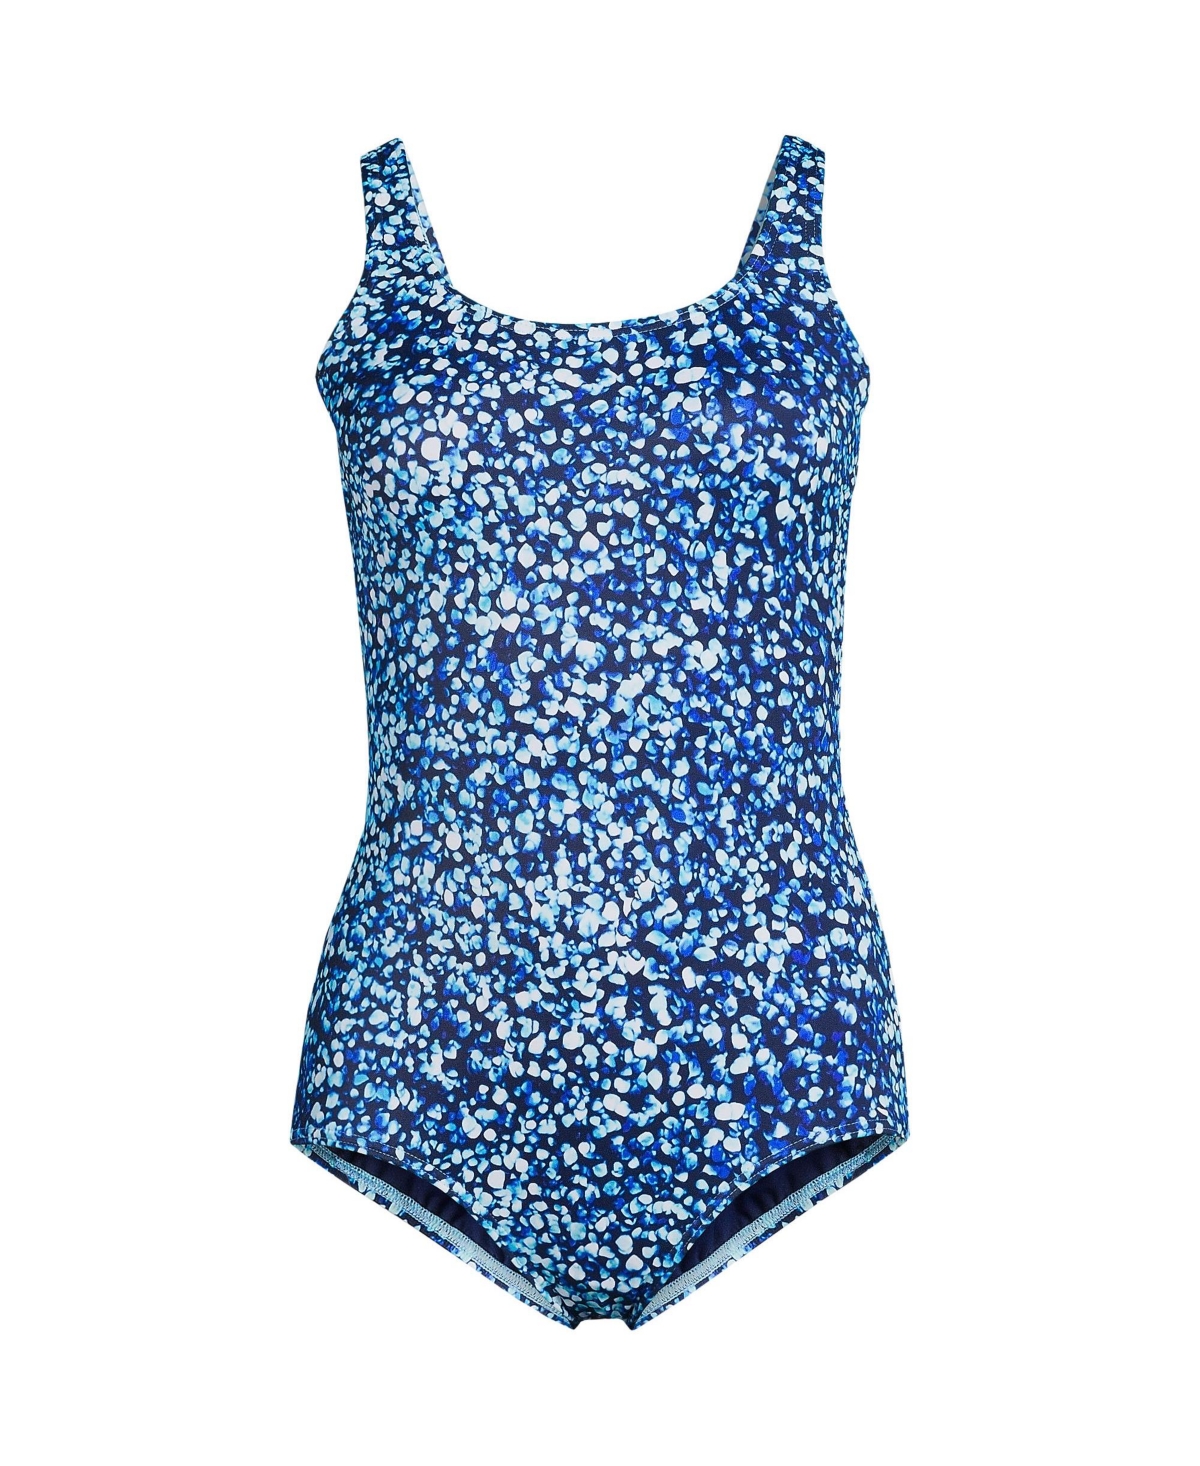 Lands' End Women's Ddd-cup Chlorine Resistant Scoop Neck Soft Cup Tugless  Sporty One Piece Swimsuit Print In Navy,turquoise Mosaic Dot